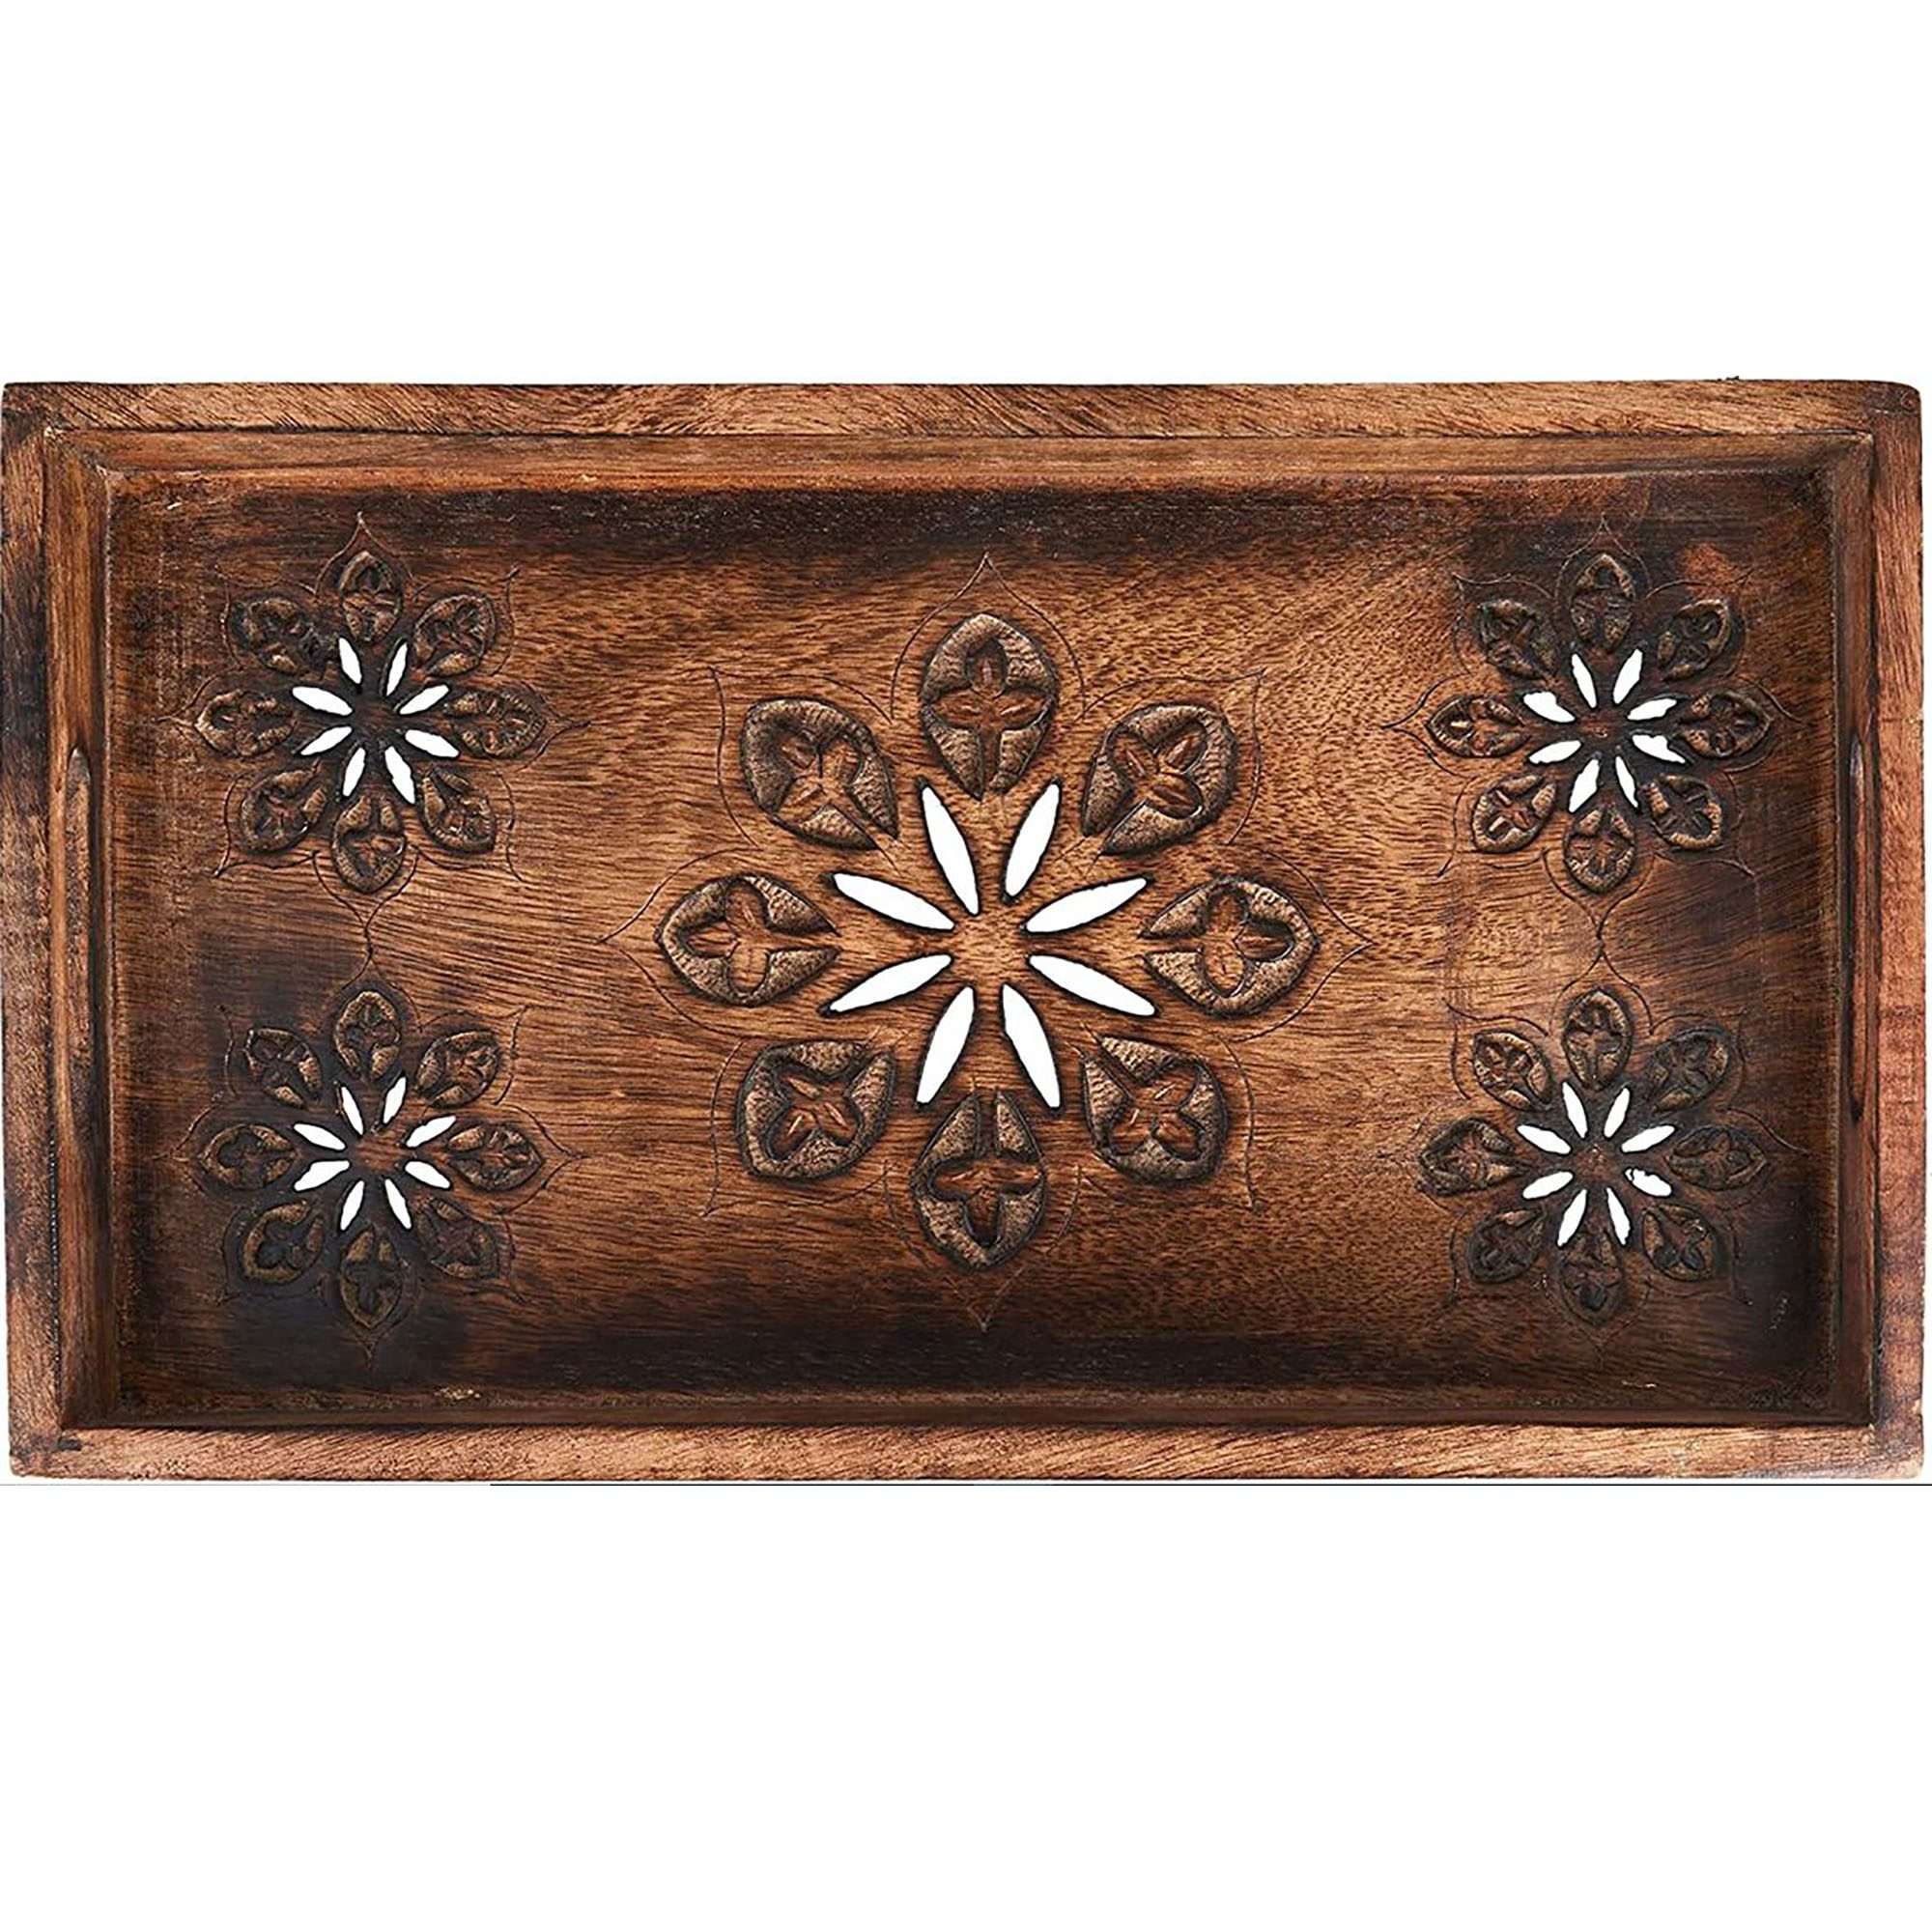 Wooden tray Beautiful | Brown wood polishes serving tray with handles| Indian Wooden serving tray